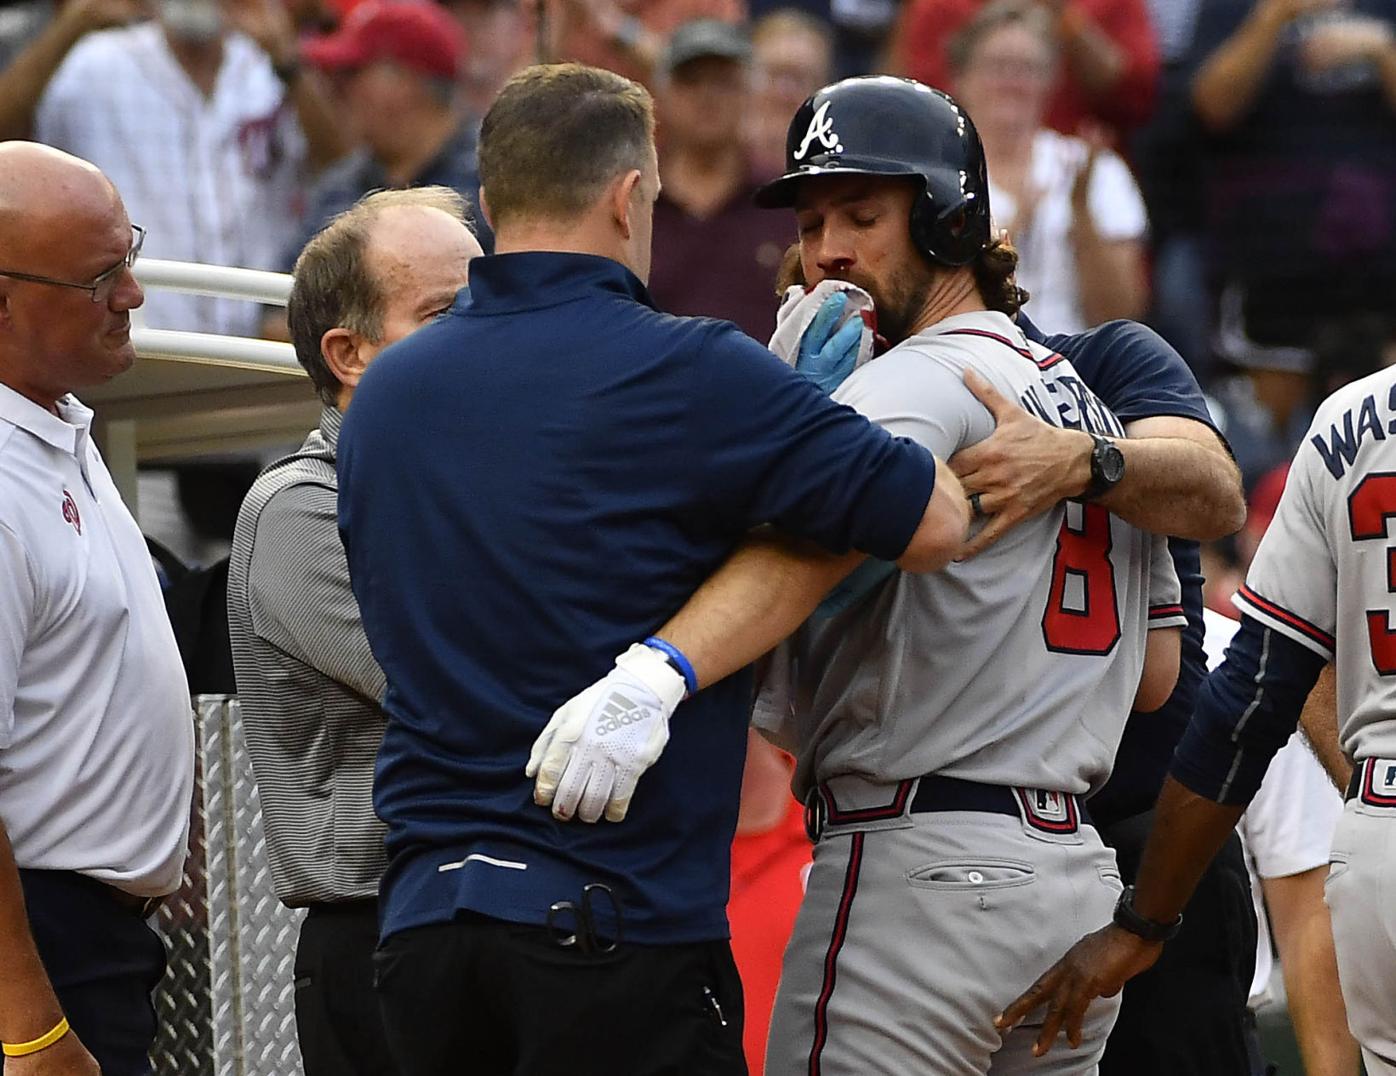 Braves' Charlie Culberson hospitalized after being struck in face, Sports